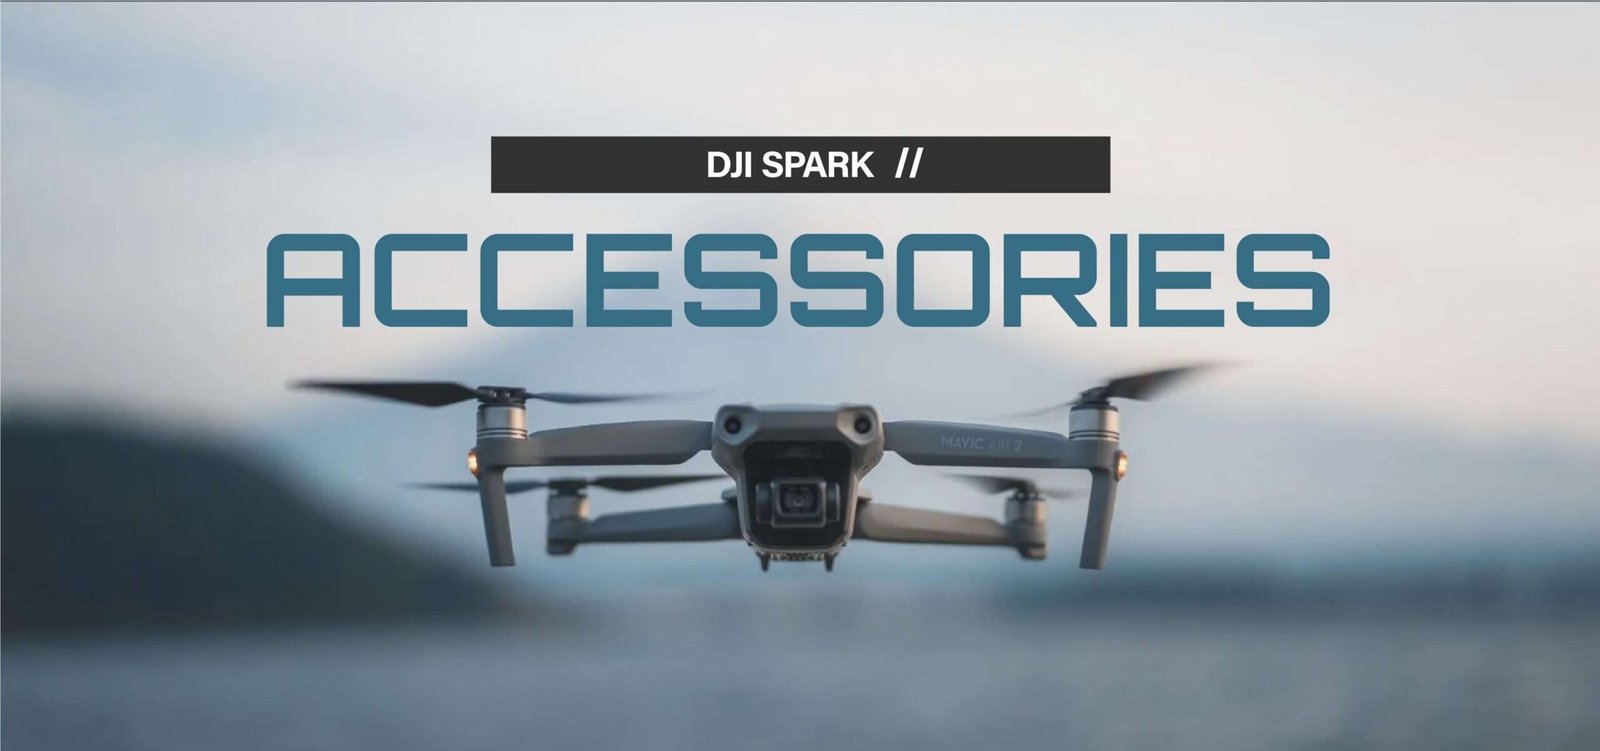 A Picture of DJI Spark